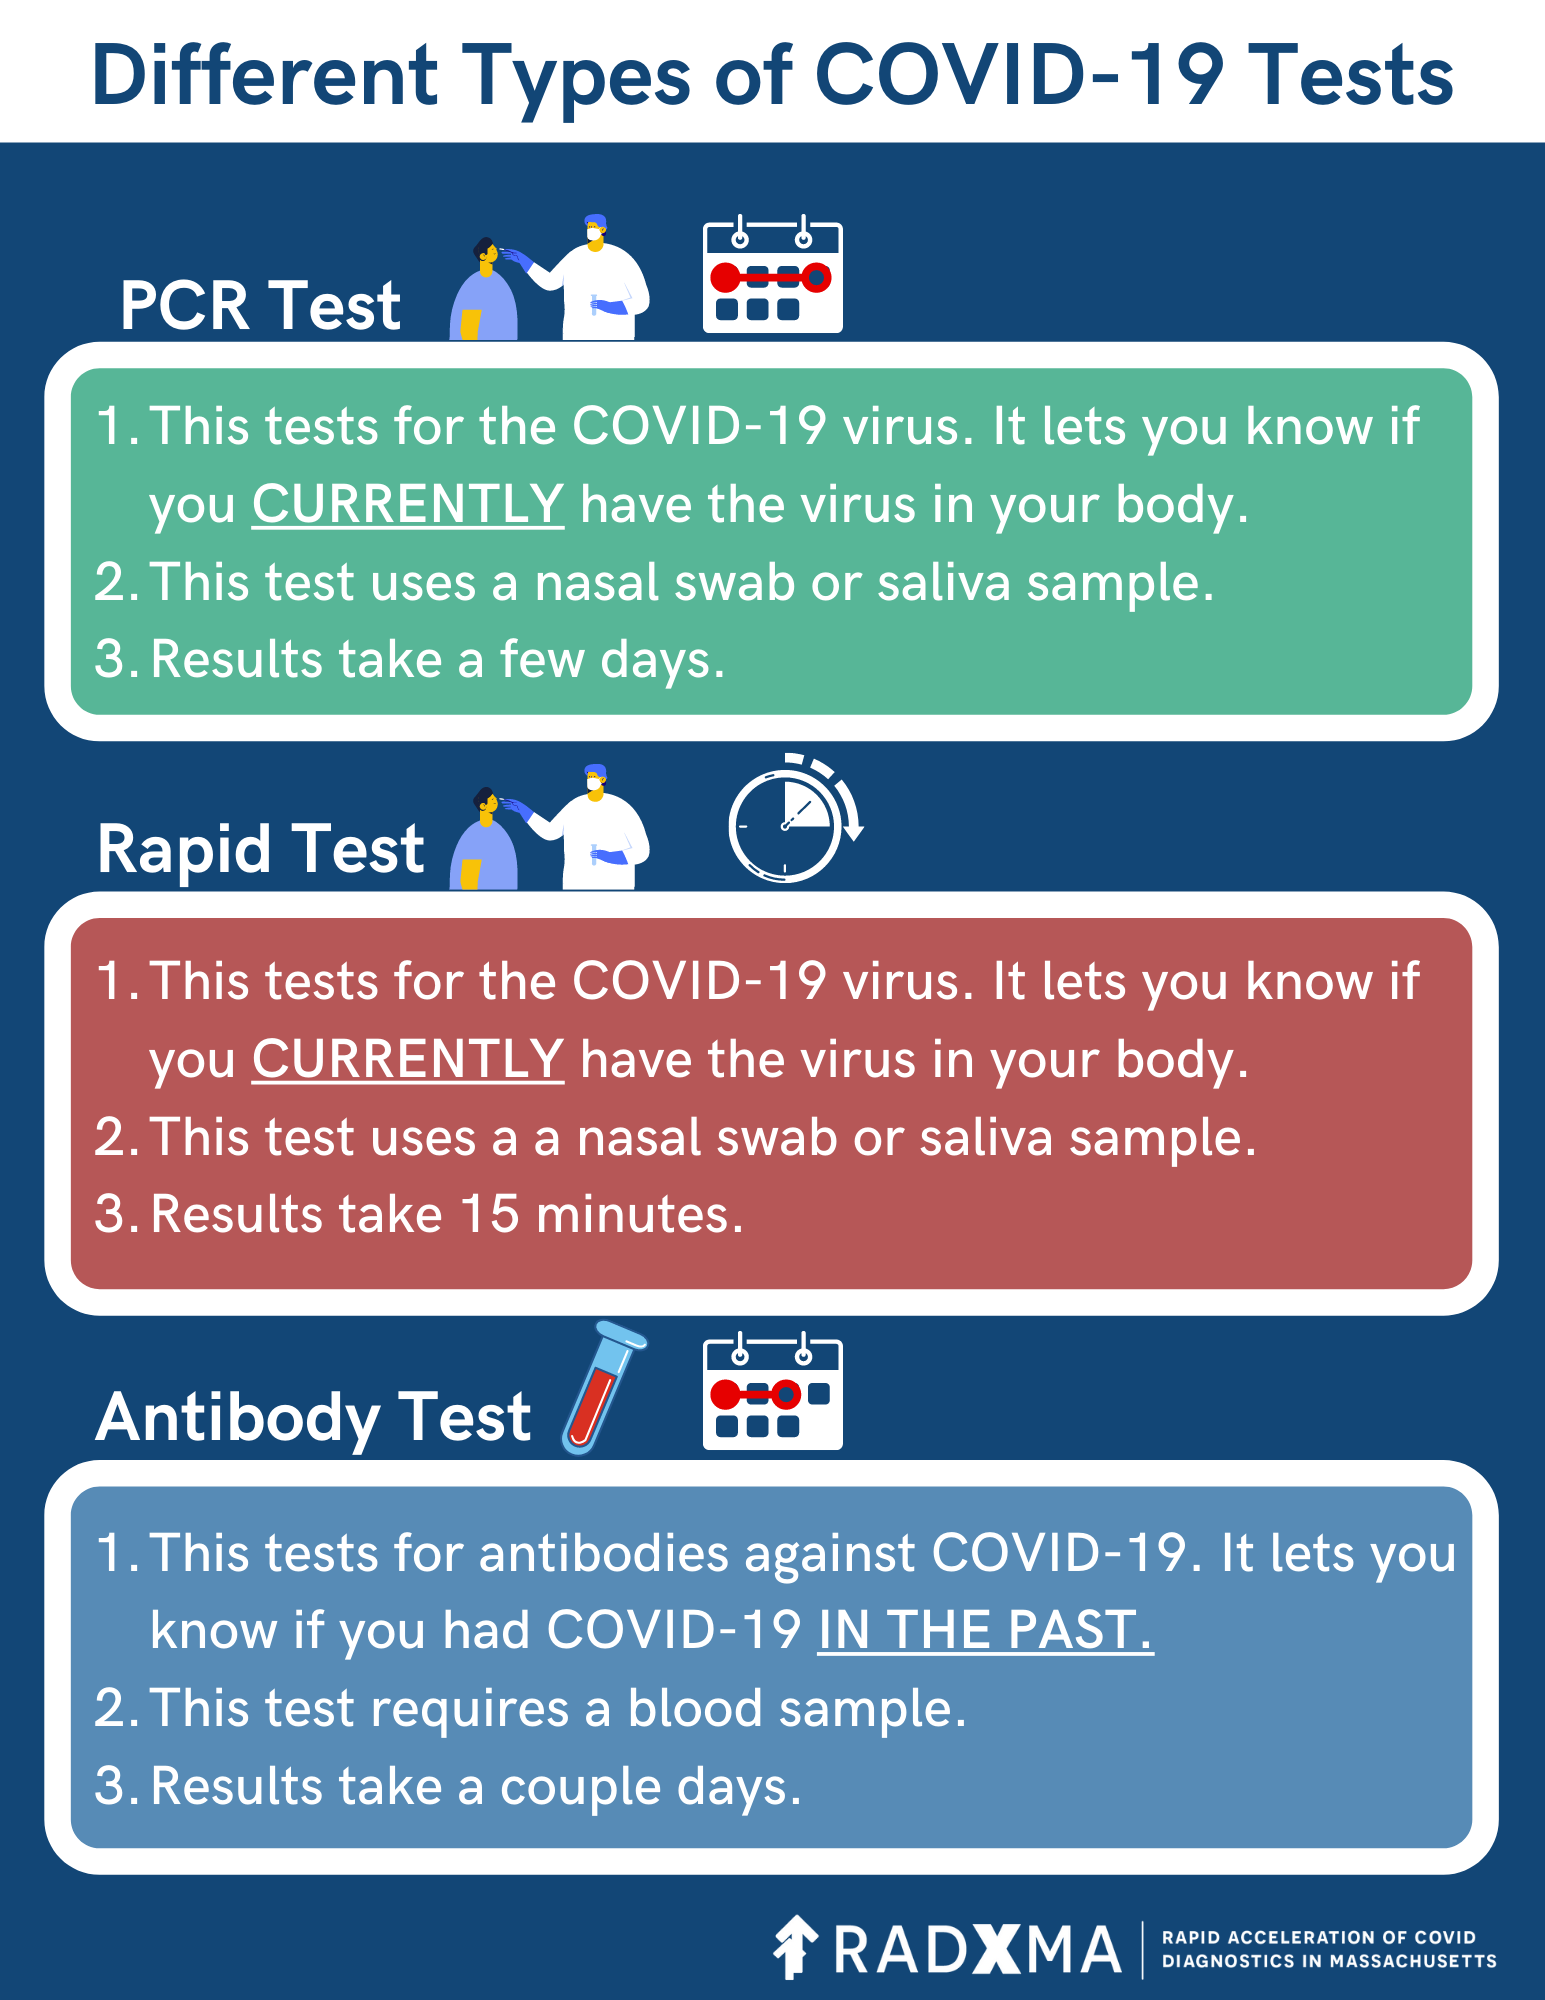 Different types of COVID-19 testing